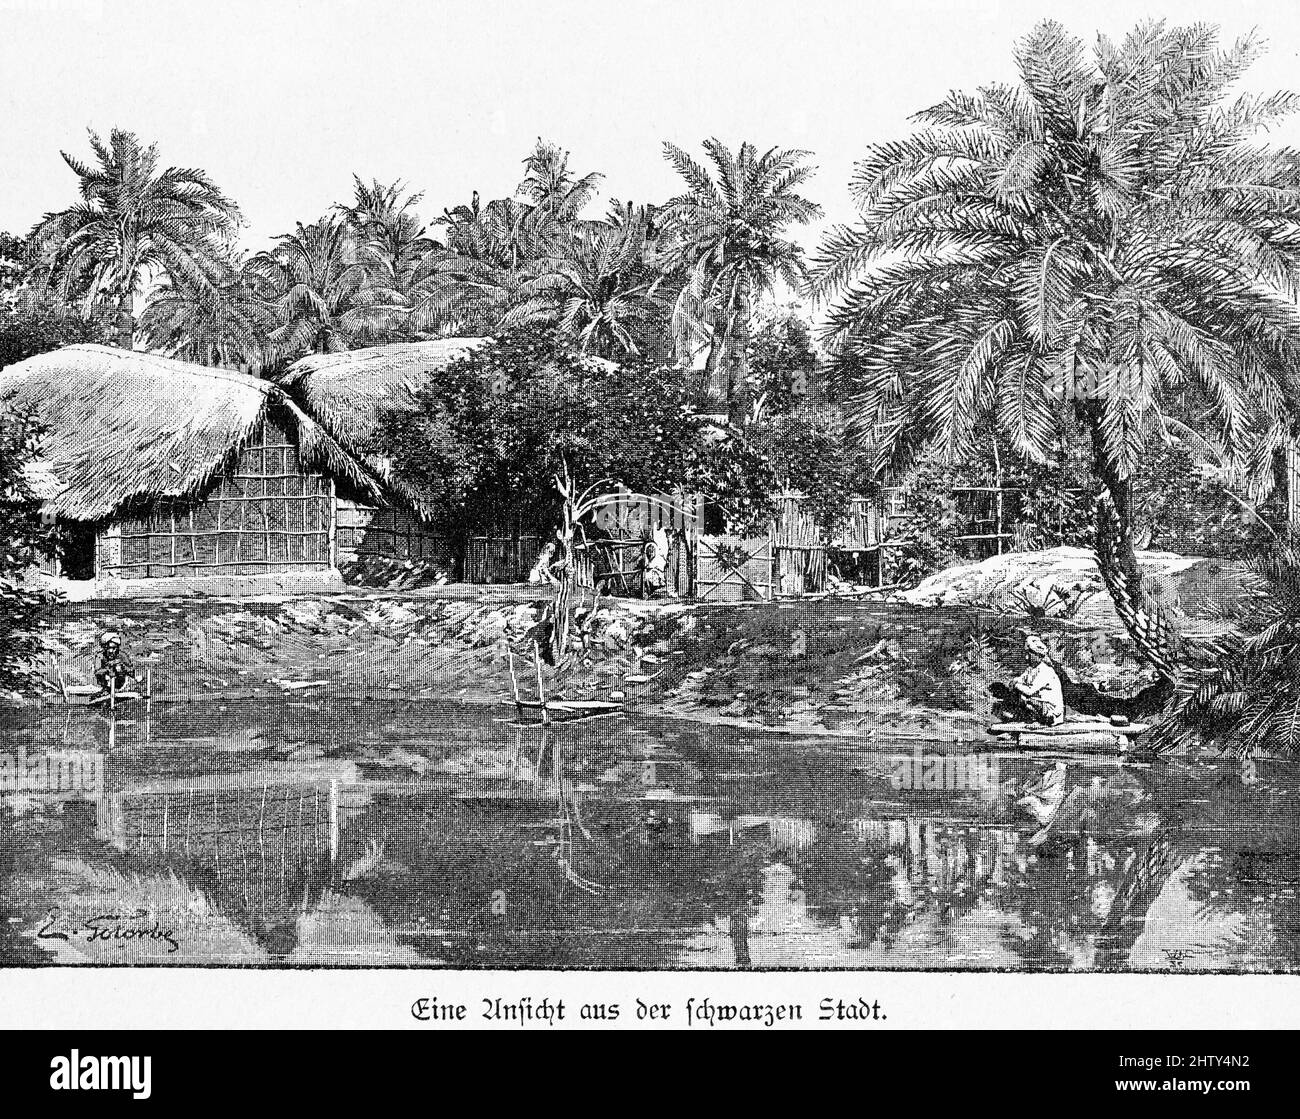 Black town, pond, houses, huts, palms, tropics, garden, thatched roof, water, reflection, historical illustration from 1897, Calcutta, India Stock Photo